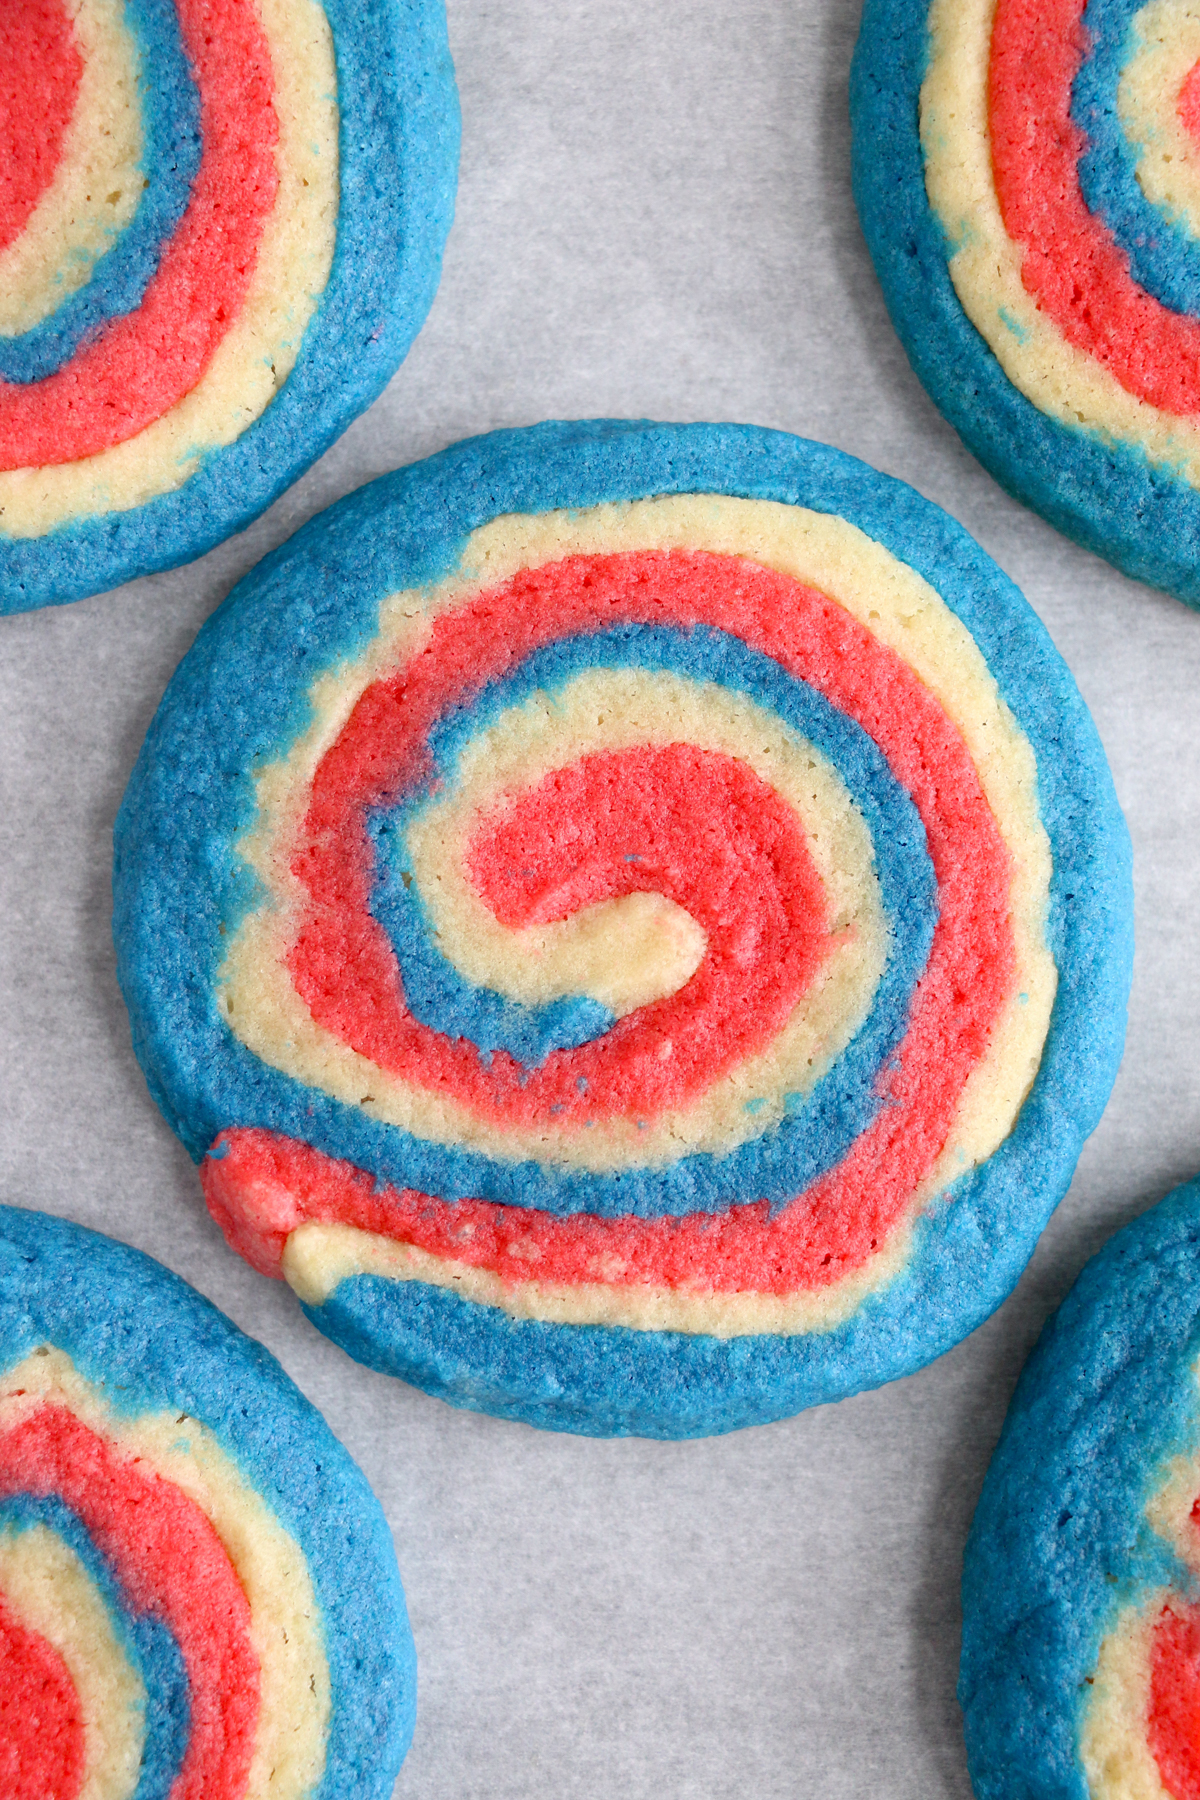 baked 4th of July pinwheel cookie on a baking sheet